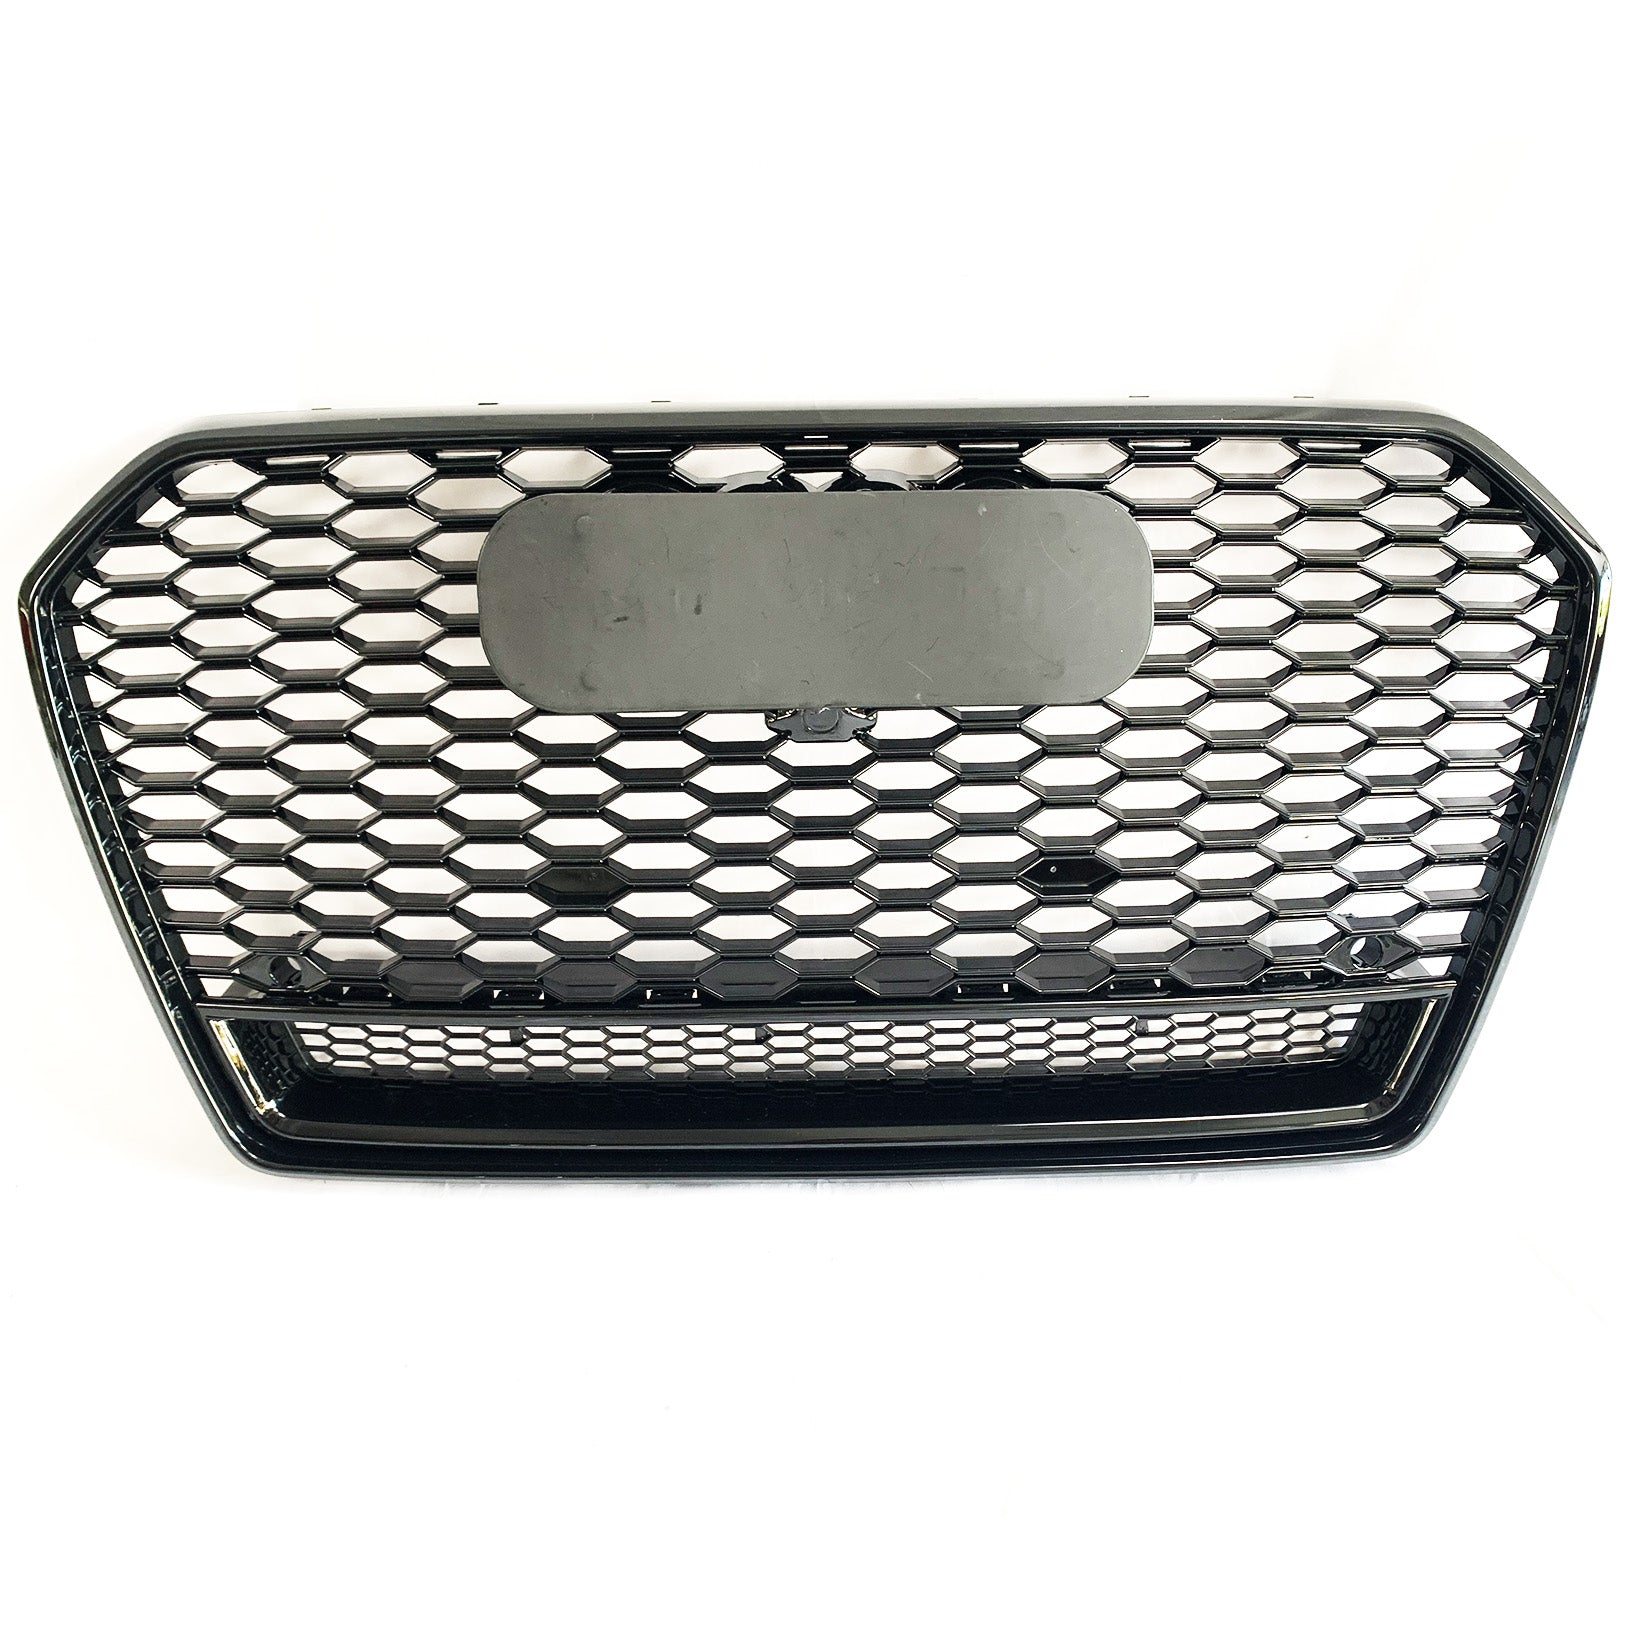 RS6 look Honeycomb black gloss grill front mesh grill for AUDI A6